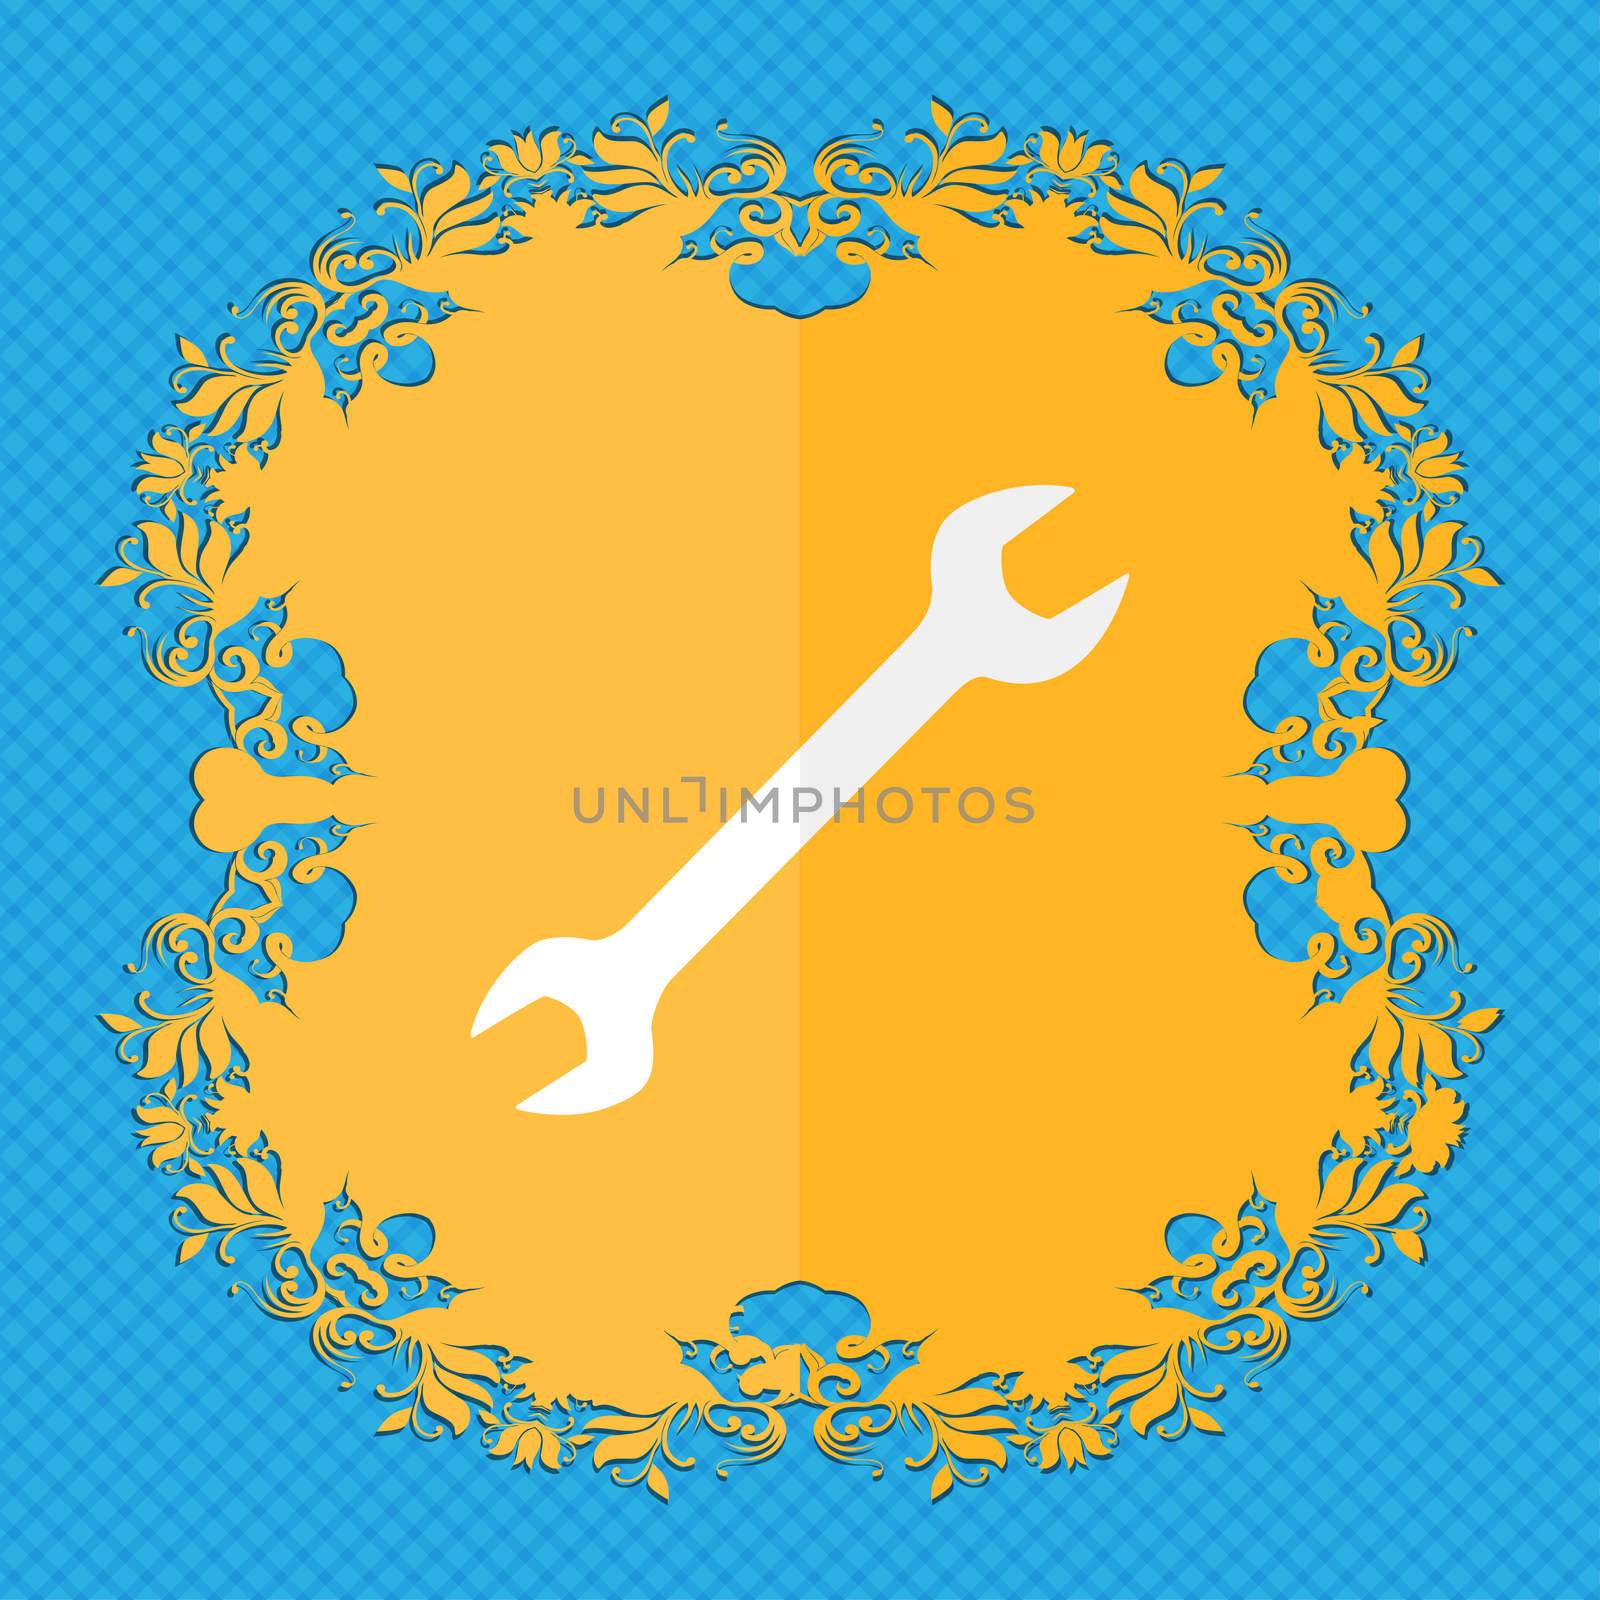 wrench. Floral flat design on a blue abstract background with place for your text. illustration